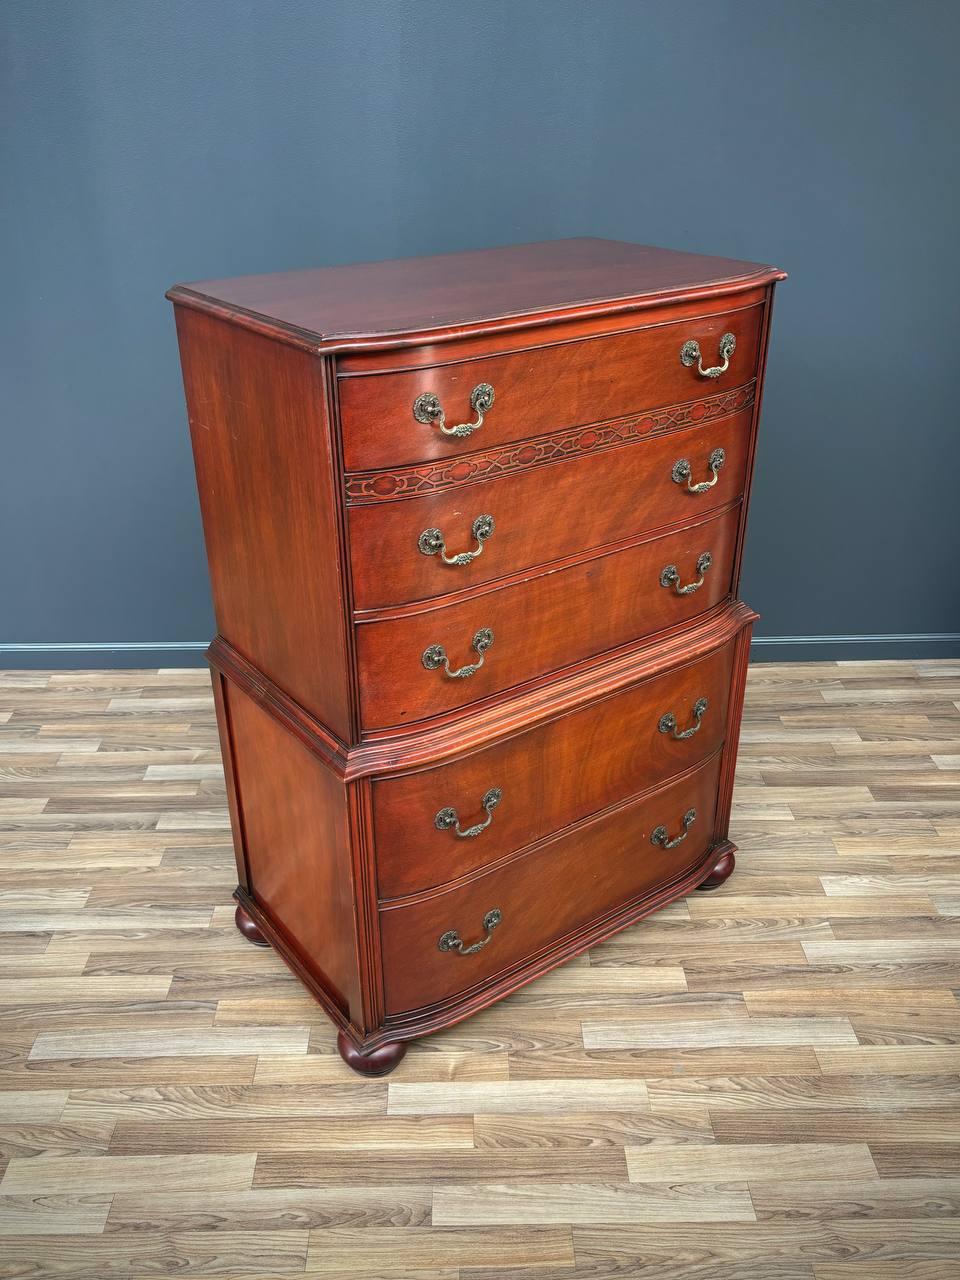 Other Antique Federal Style Mahogany Highboy Dresser For Sale